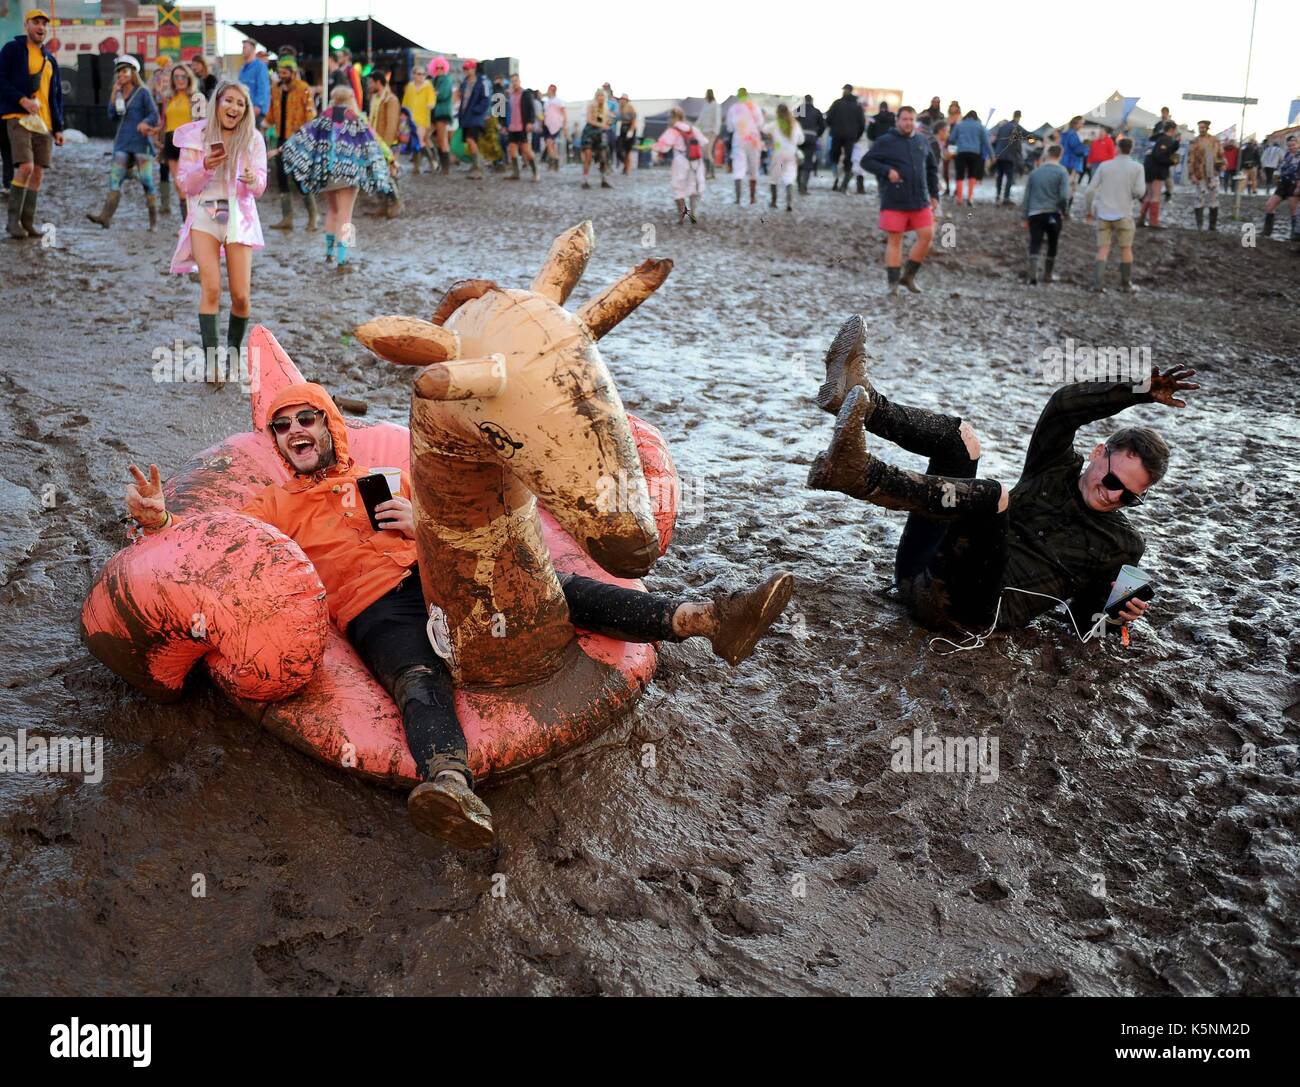 Lulworth Estate, Dorset, UK. 9th September, 2017. Bestival Music Festival. Festival goers enjoy the muddy conditions riding an inflatable down the slope Credit: Finnbarr Webster/Alamy Live News Stock Photo